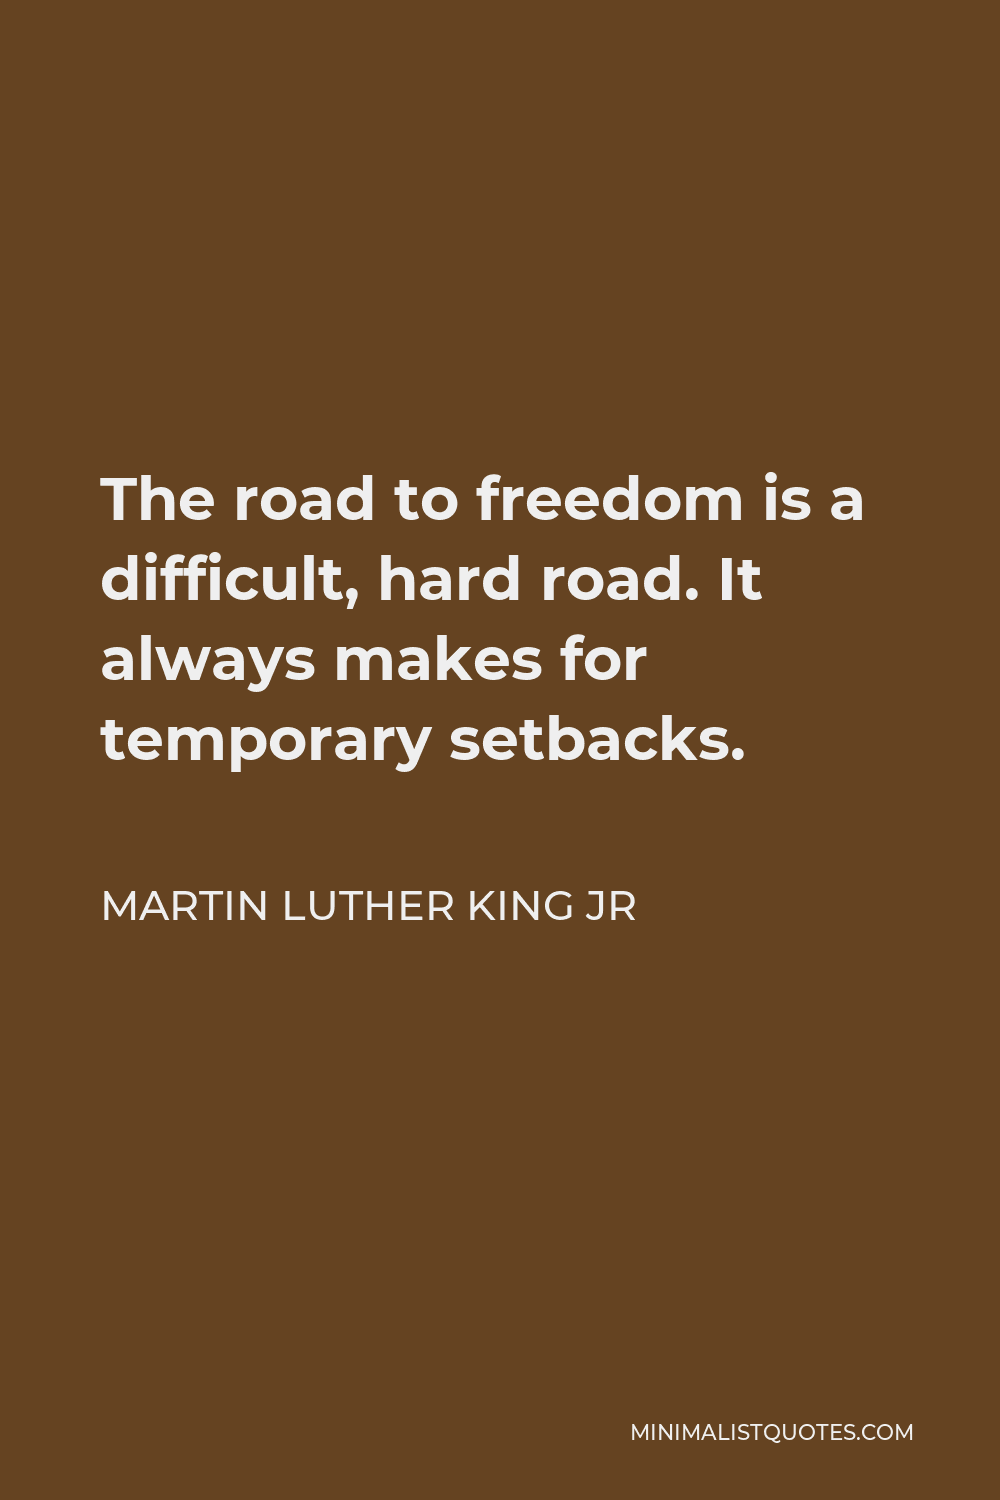 Martin Luther King Jr Quote - The road to freedom is a difficult, hard road. It always makes for temporary setbacks.